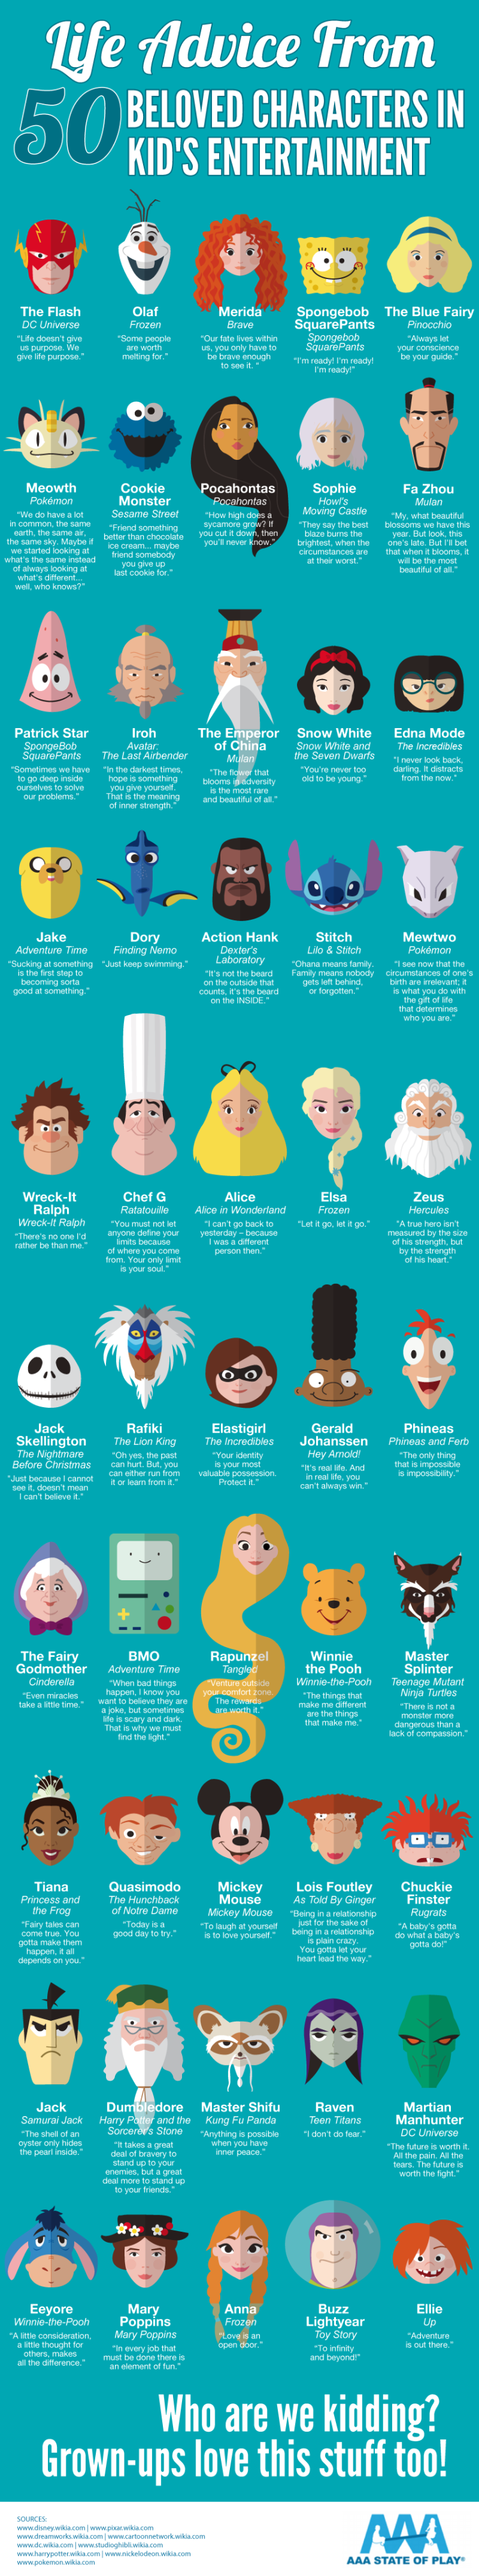 Life Advice from Beloved Kids' Characters [Infographic]